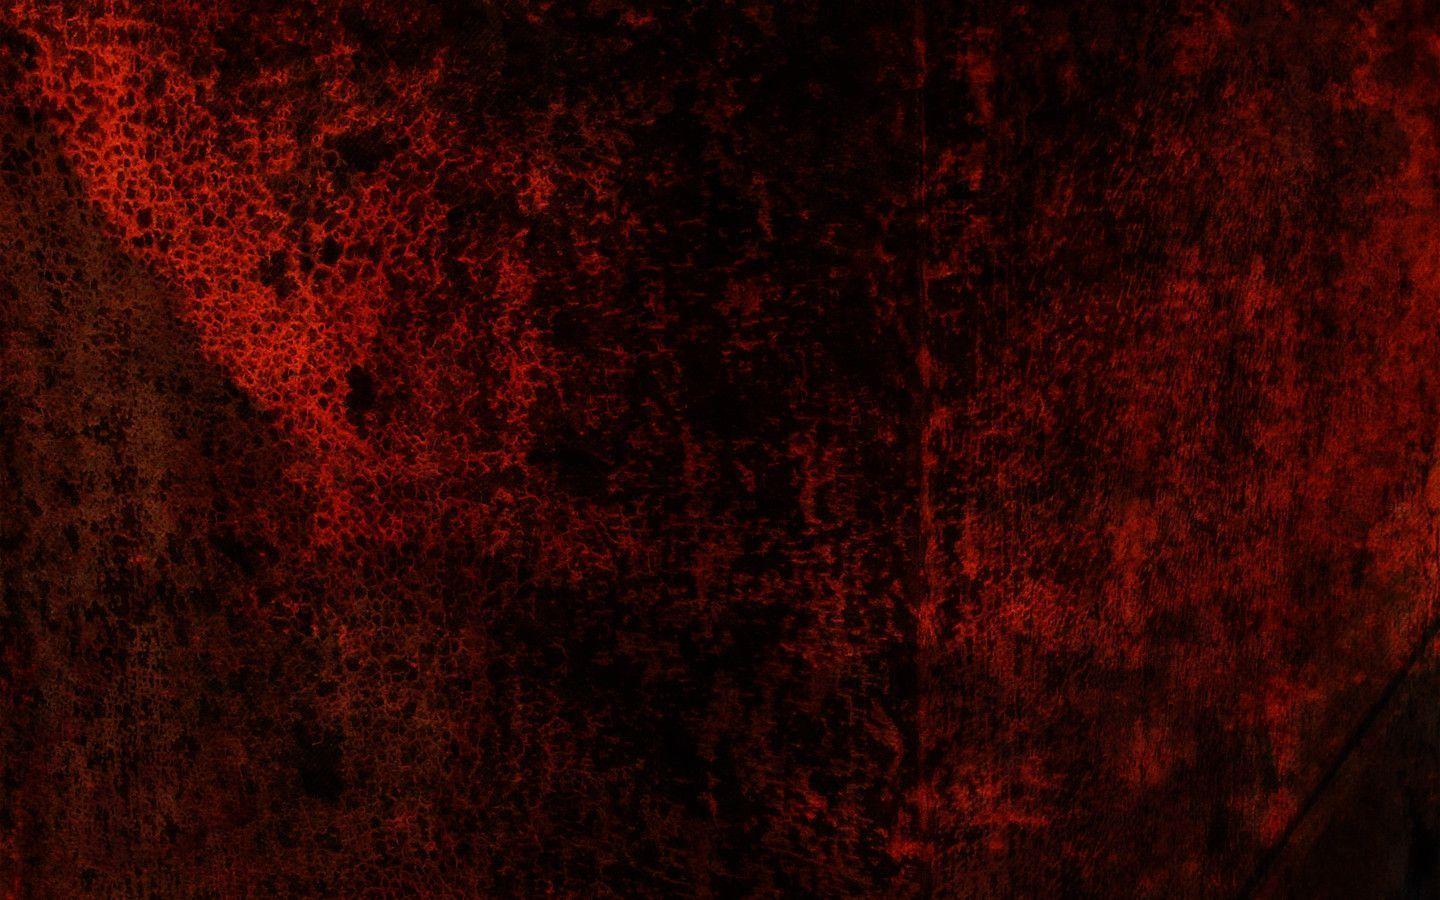 Blood Wallpaper, HD Blood Wallpaper and Photo. View HD